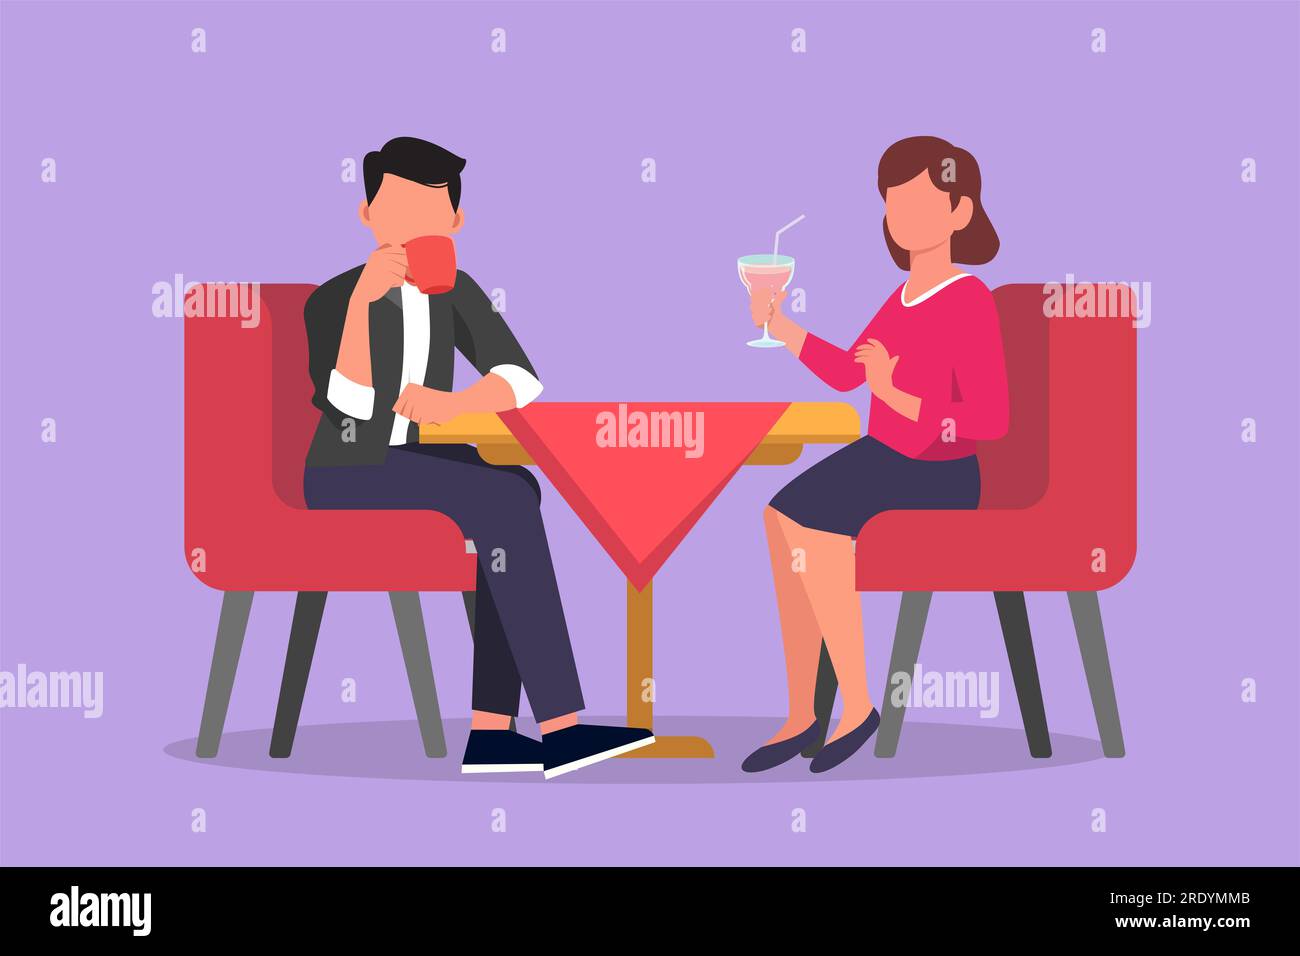 Romantic Dinner Silhouette PNG Transparent Stickman Romantic Dinner By  Corm Studio Stickman Romantic Dinner Candle Light Dinner PNG Image For  Free Download  Candle light dinner Romantic dinners Diwali poster